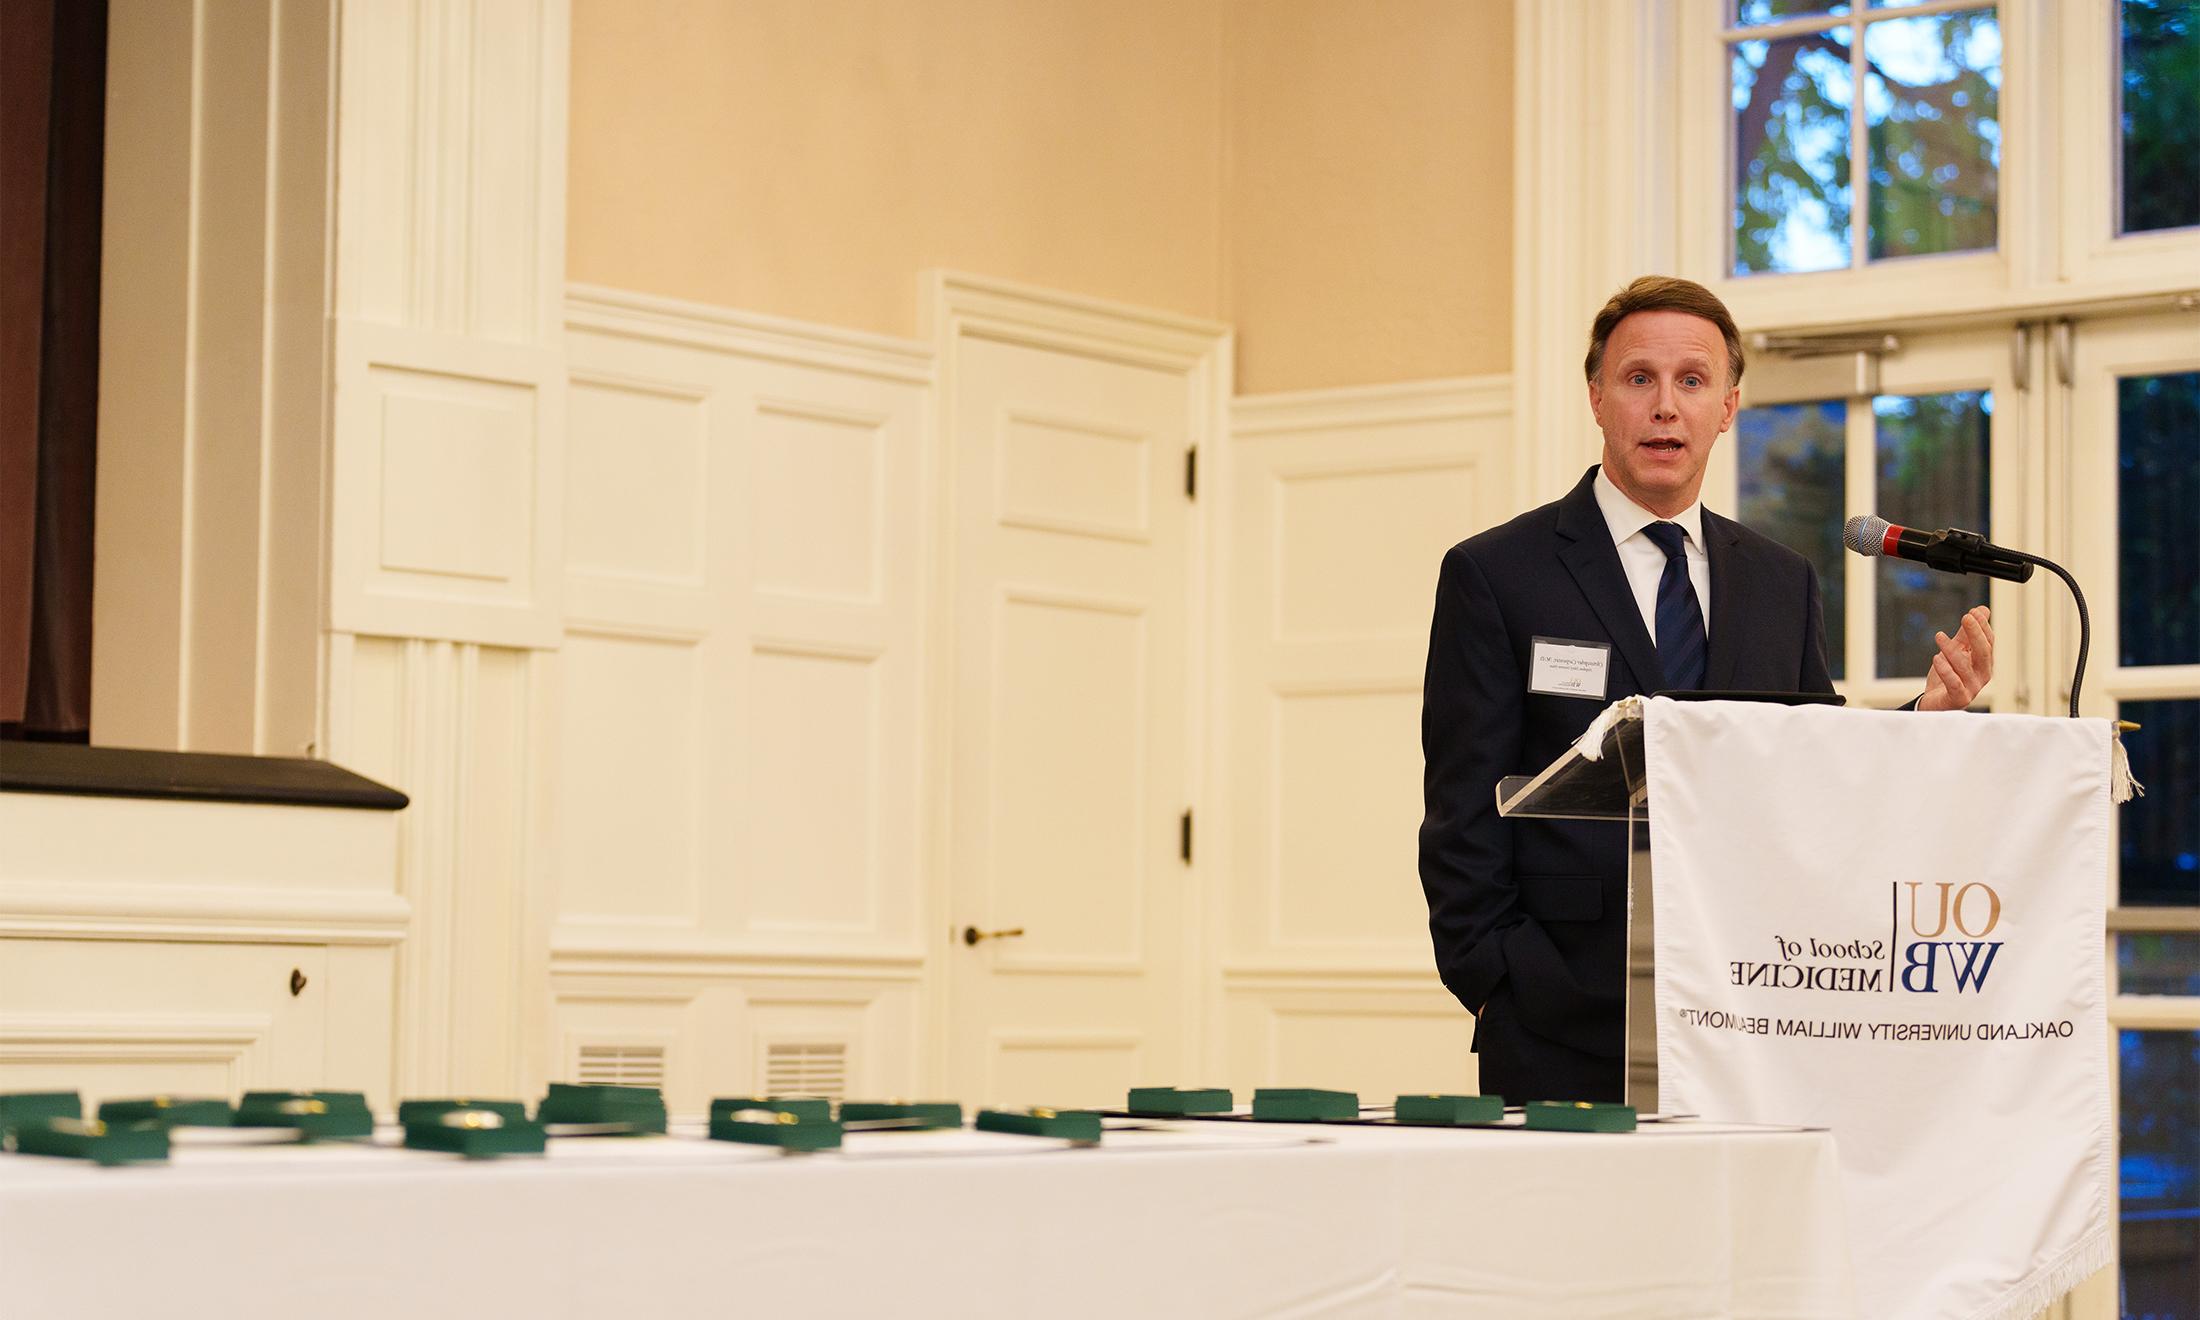 An image of Dr. Carpenter speaking at the AOA ceremony